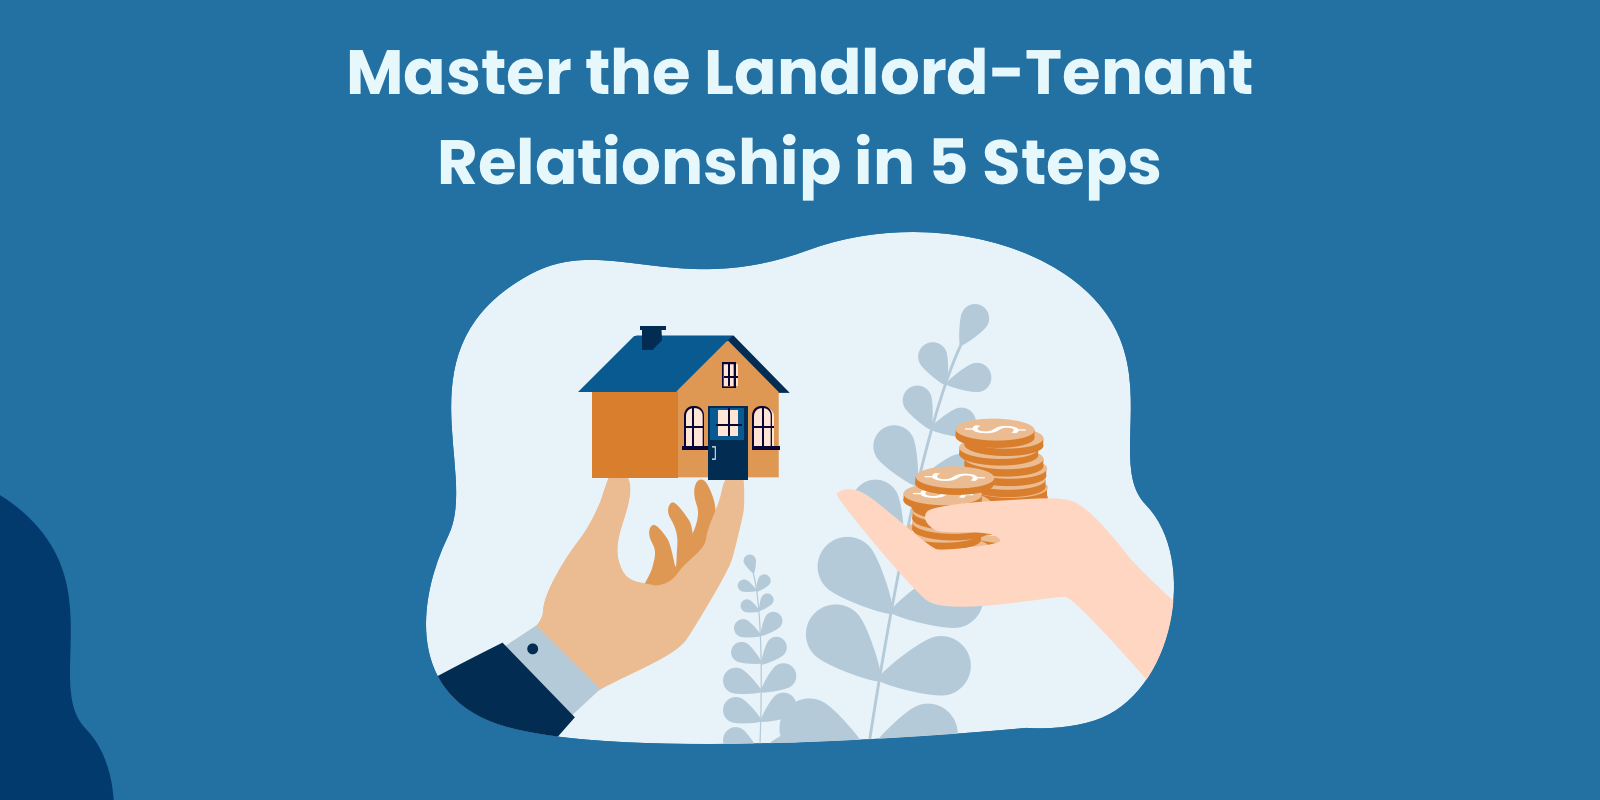 Master the Landlord-Tenant Relationship in 5 Steps